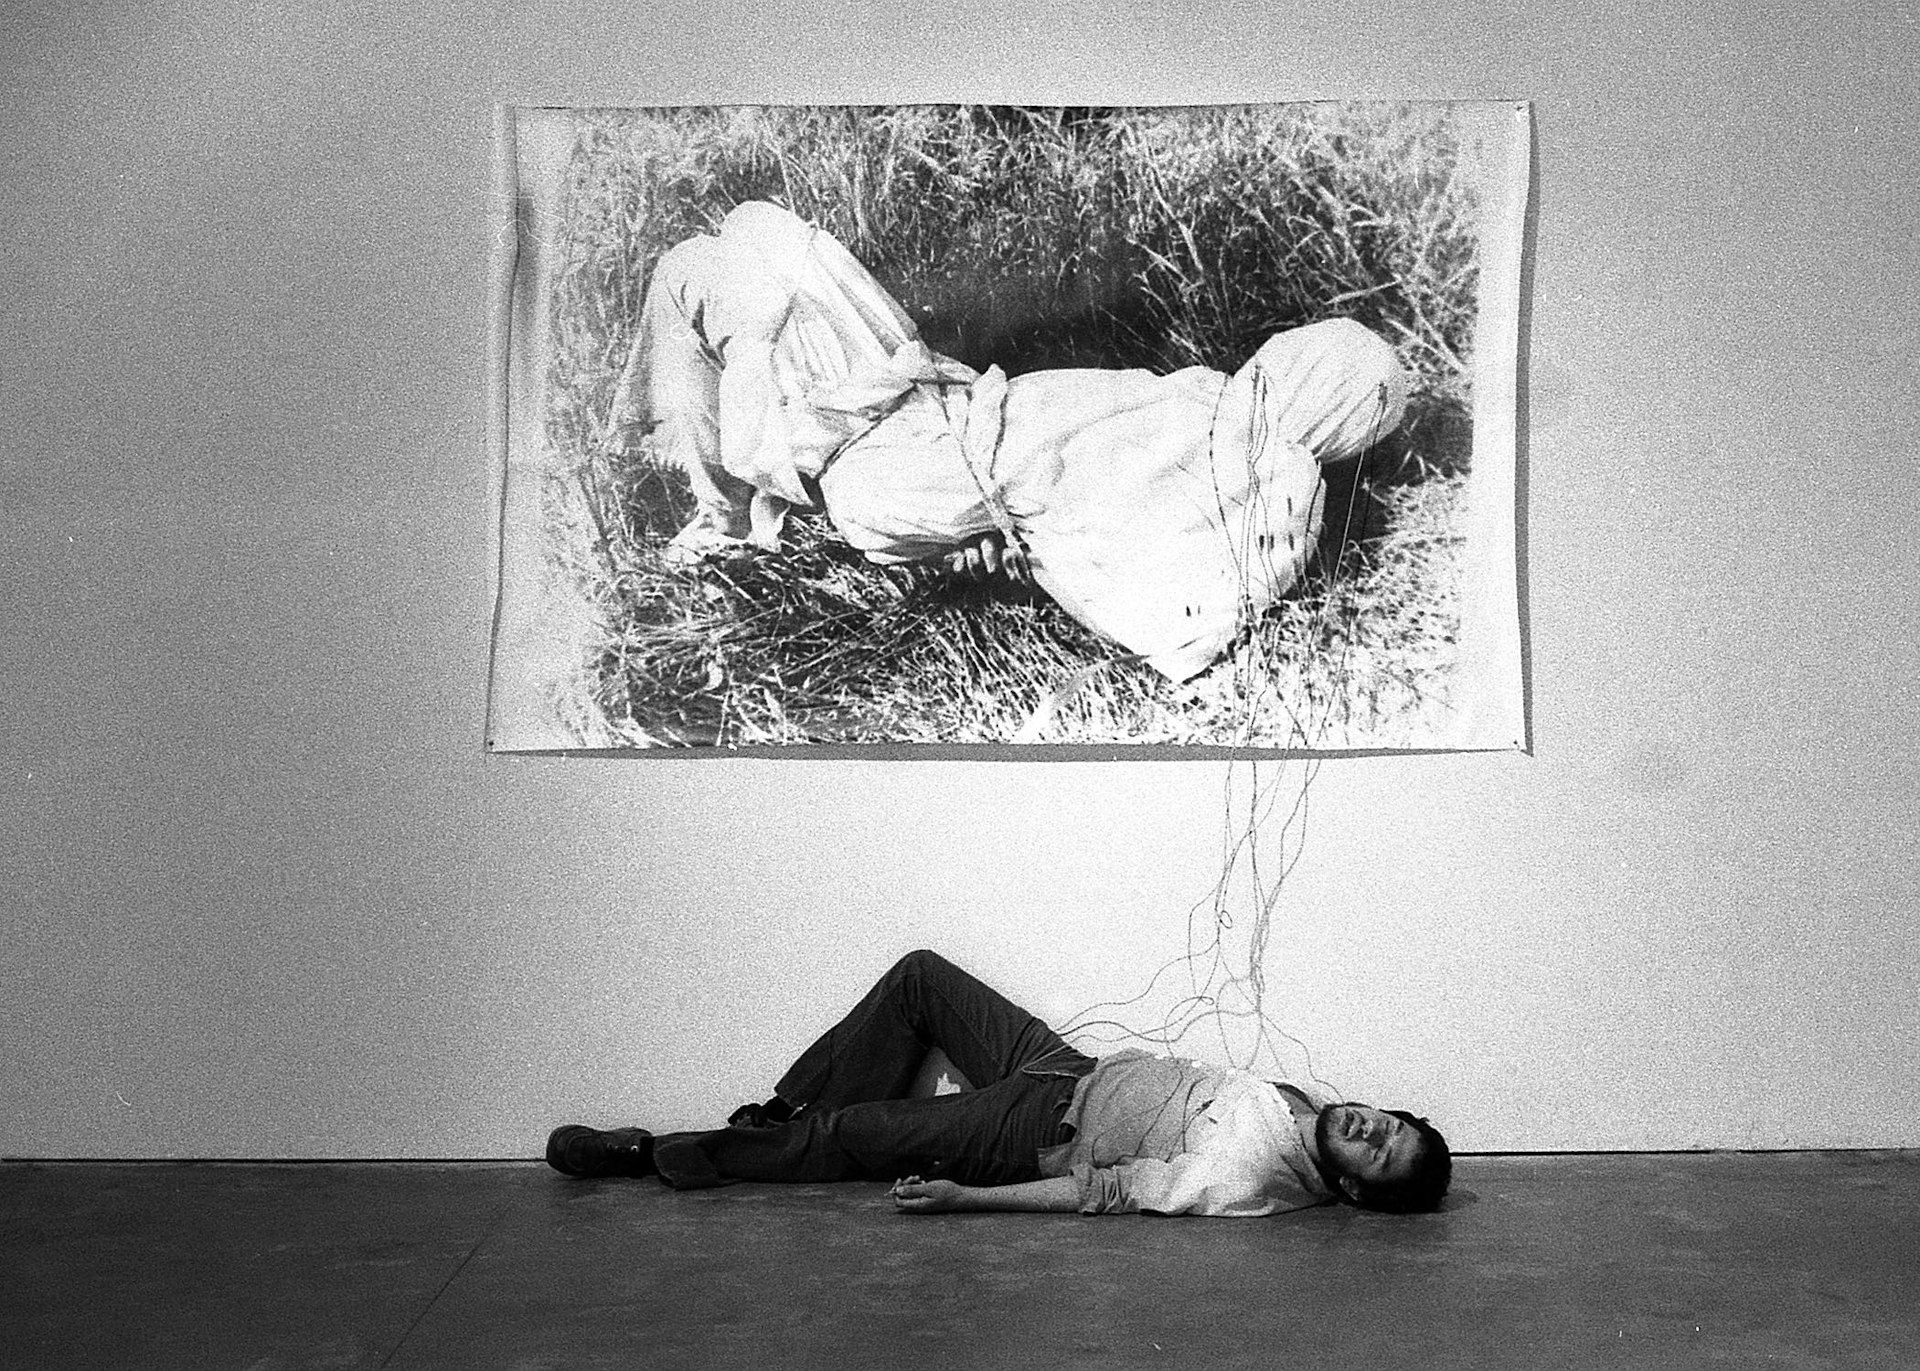 Harry Gamboa Jr., Roberto Gil de Montes, 1978. Gil de Montes shown with his work Tongue Tied in the No Movie exhibition at LACE (Los Angeles Contemporary Exhibitions), May 2–31, 1978. © 1978, Harry Gamboa Jr.